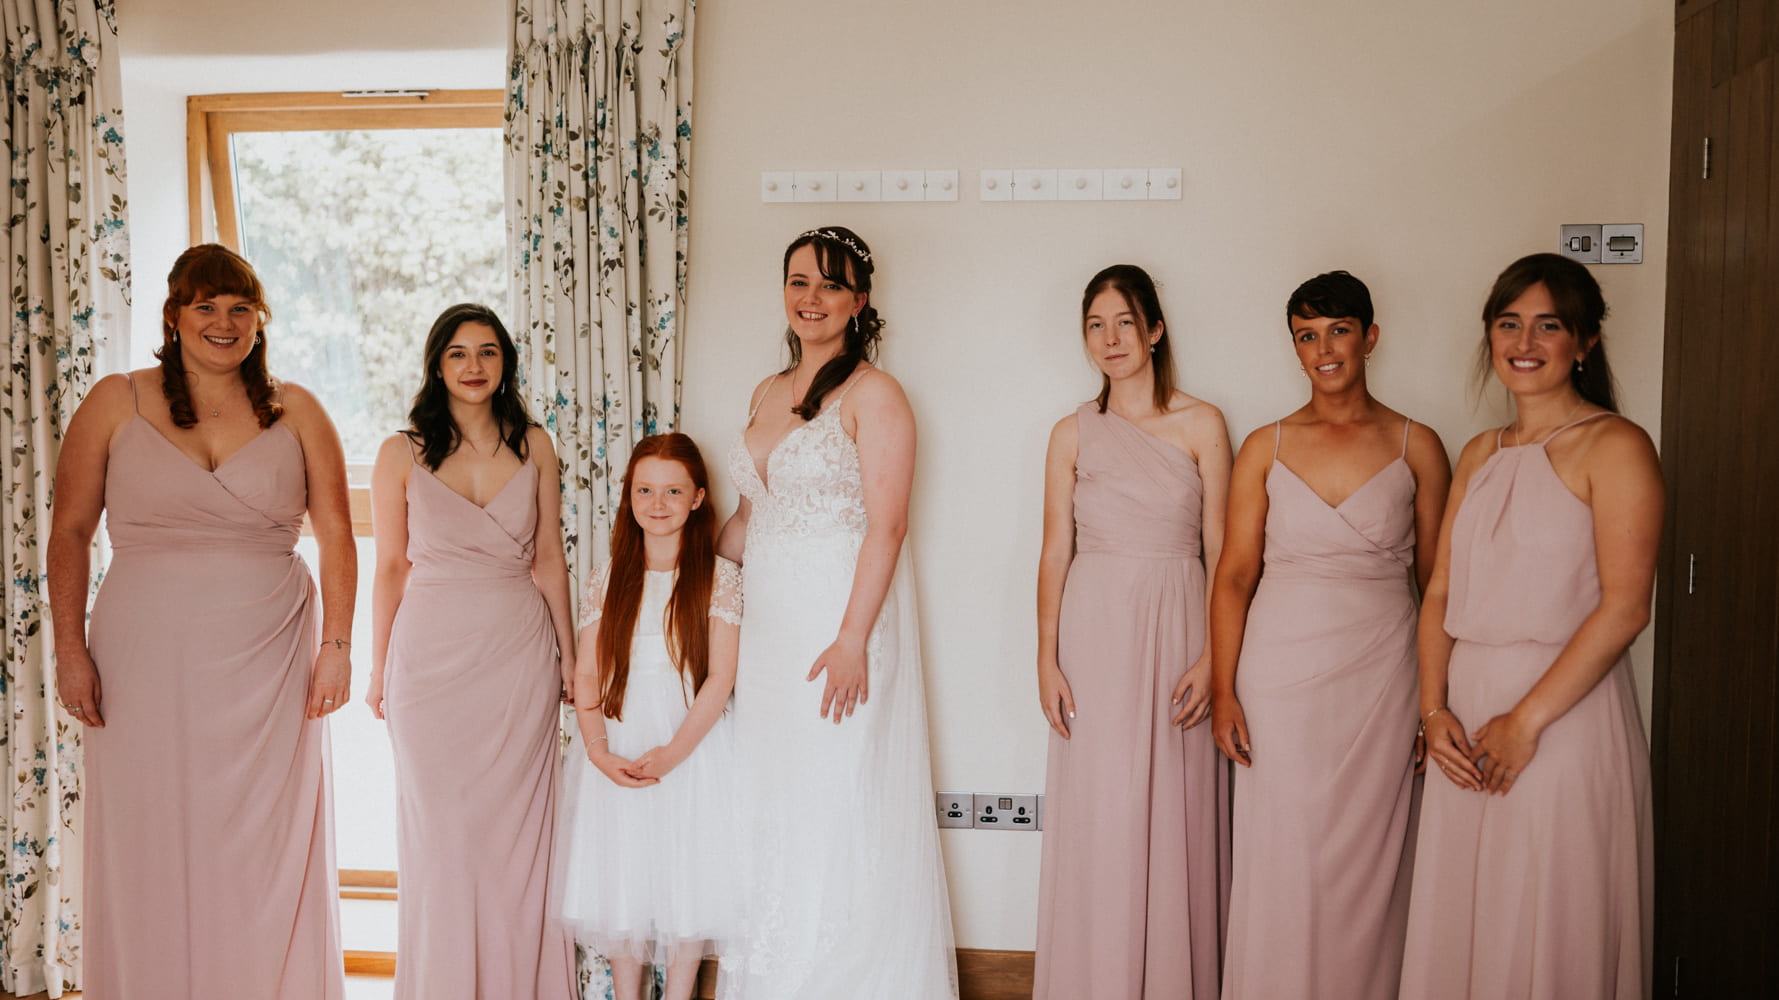 Lucy with her bridesmaids